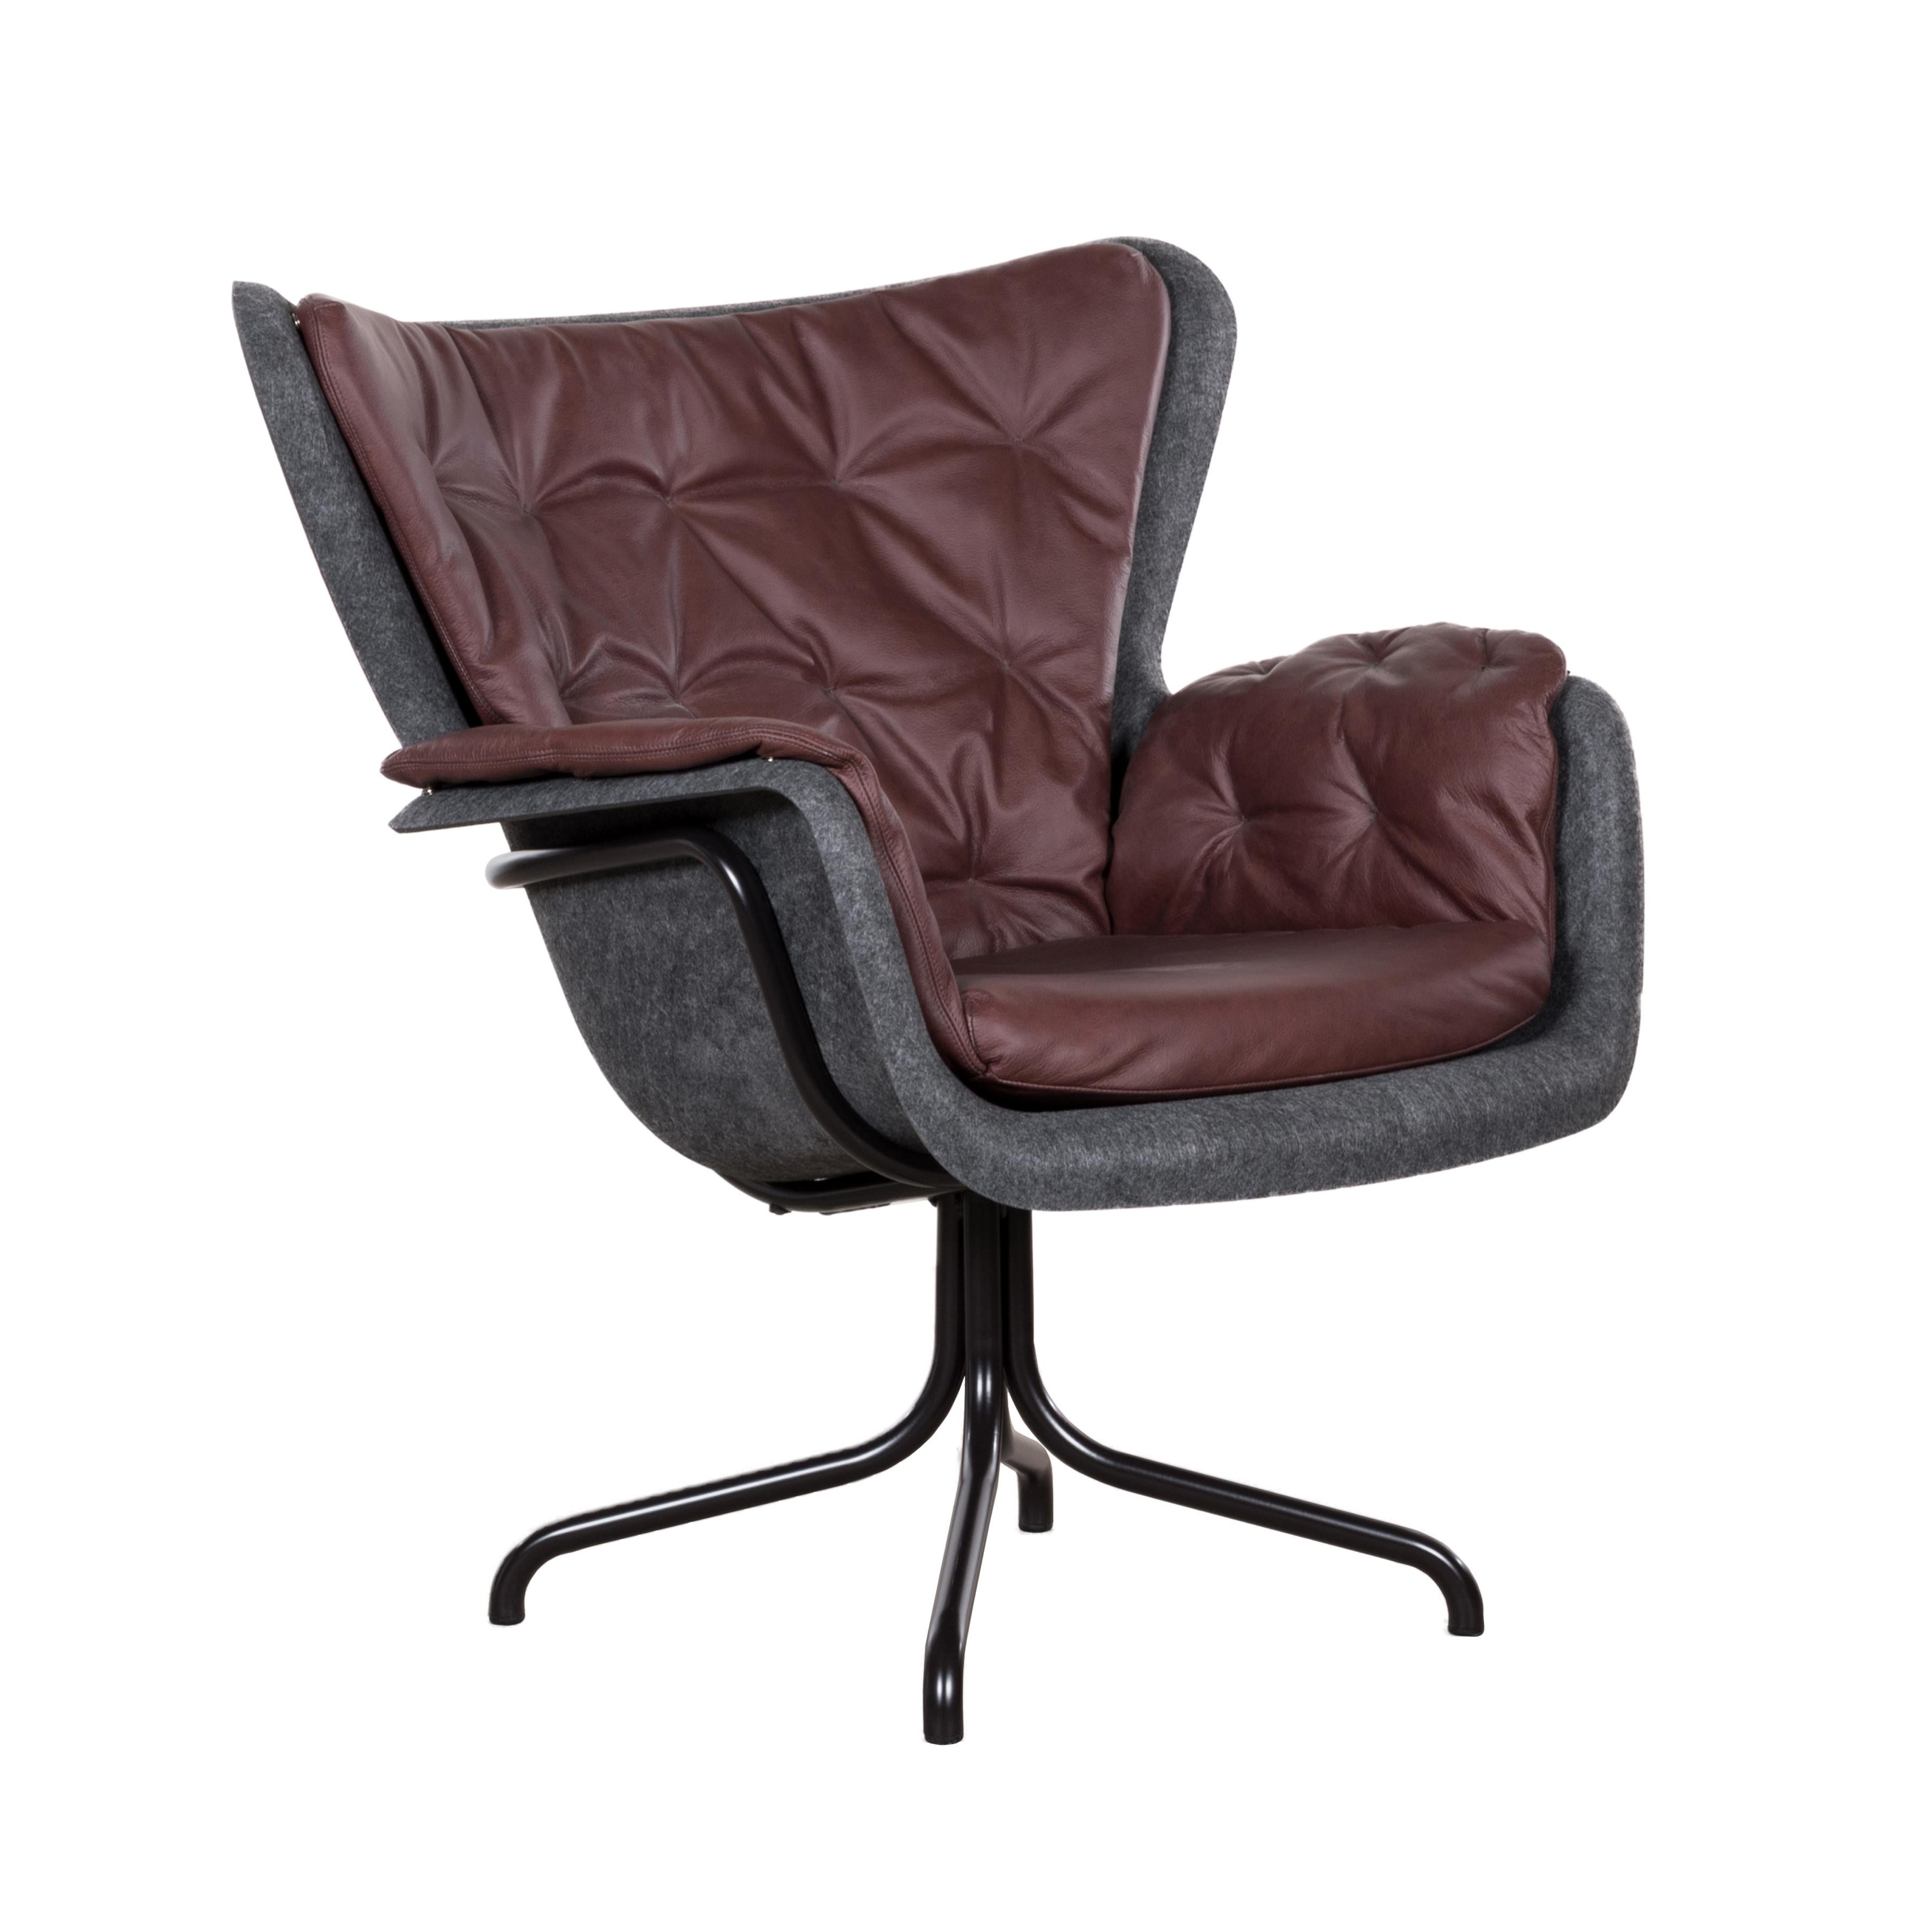 PET 'Eco Friendly' Armchair in Dark Grey and Red Brown Leather, Netherlands